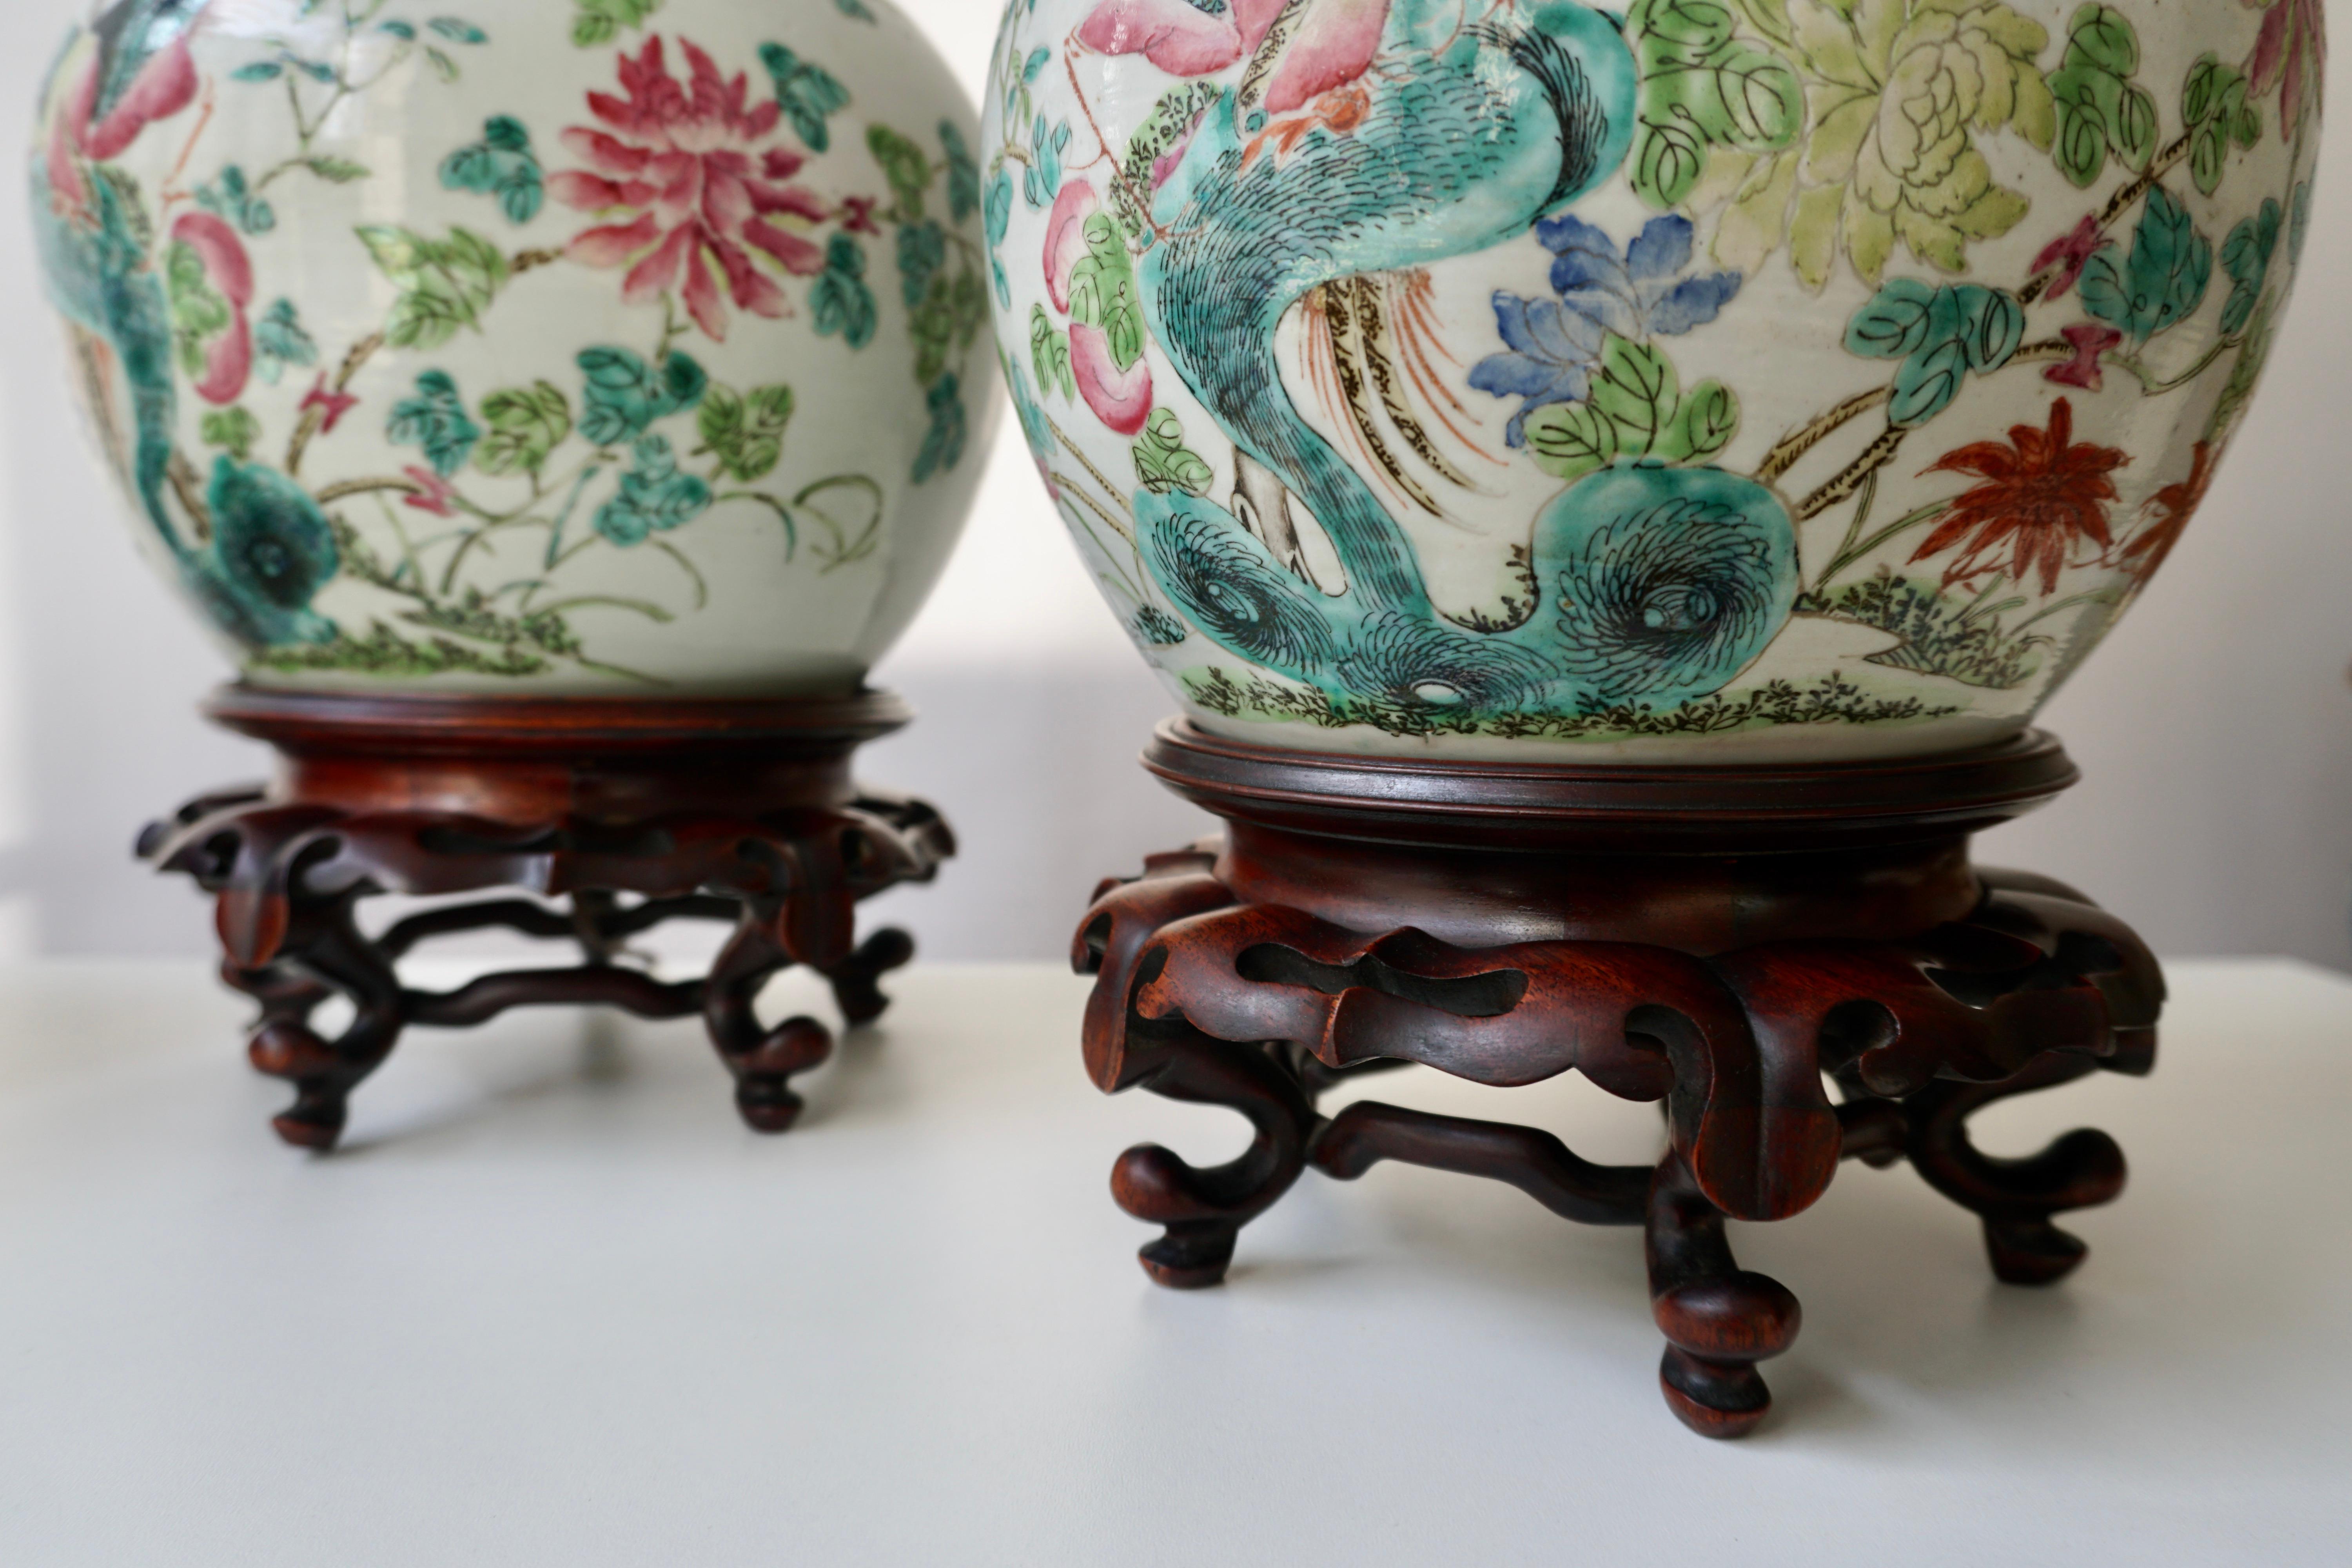 Pair of Chinese Export Porcelain Painted Ginger Jar Table Lamps with Birds 8